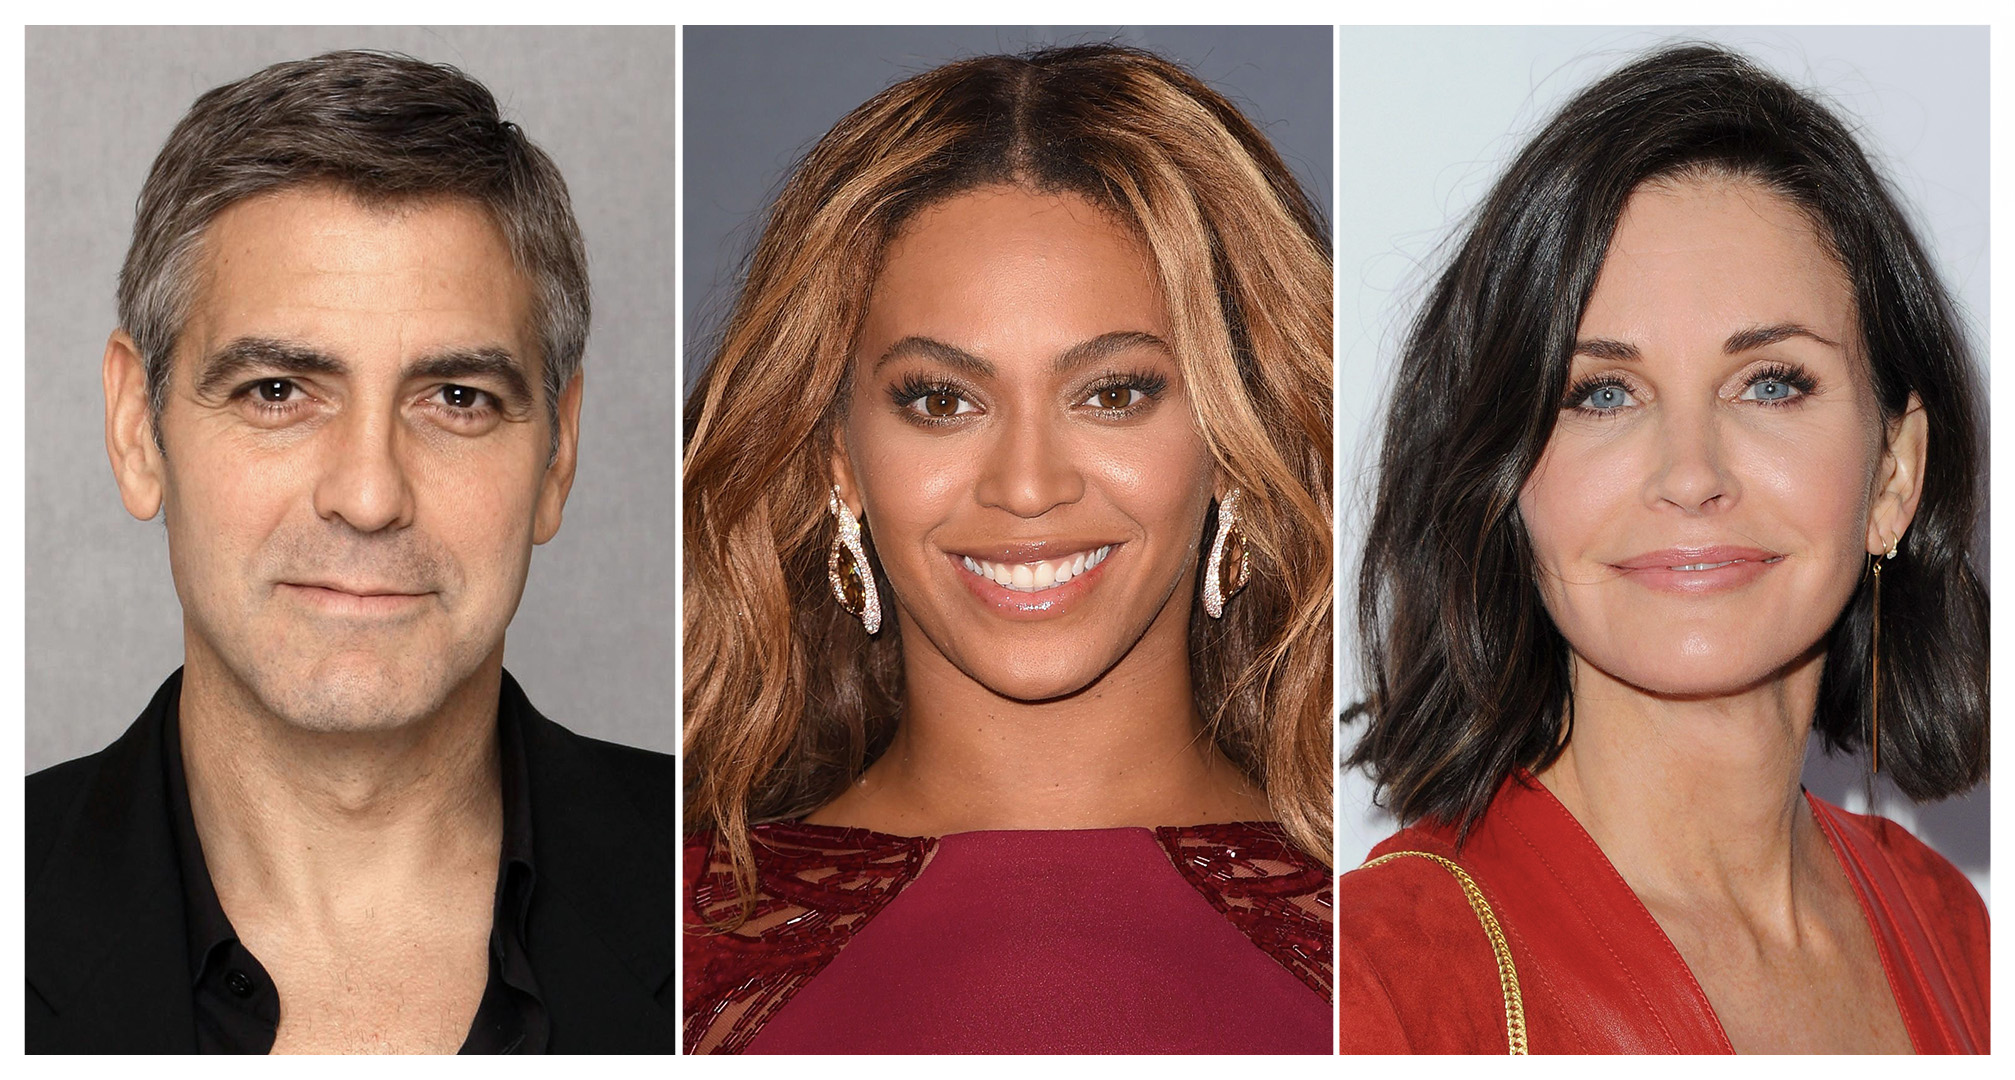 collage of george clooney, beyoncé, and courtney cox